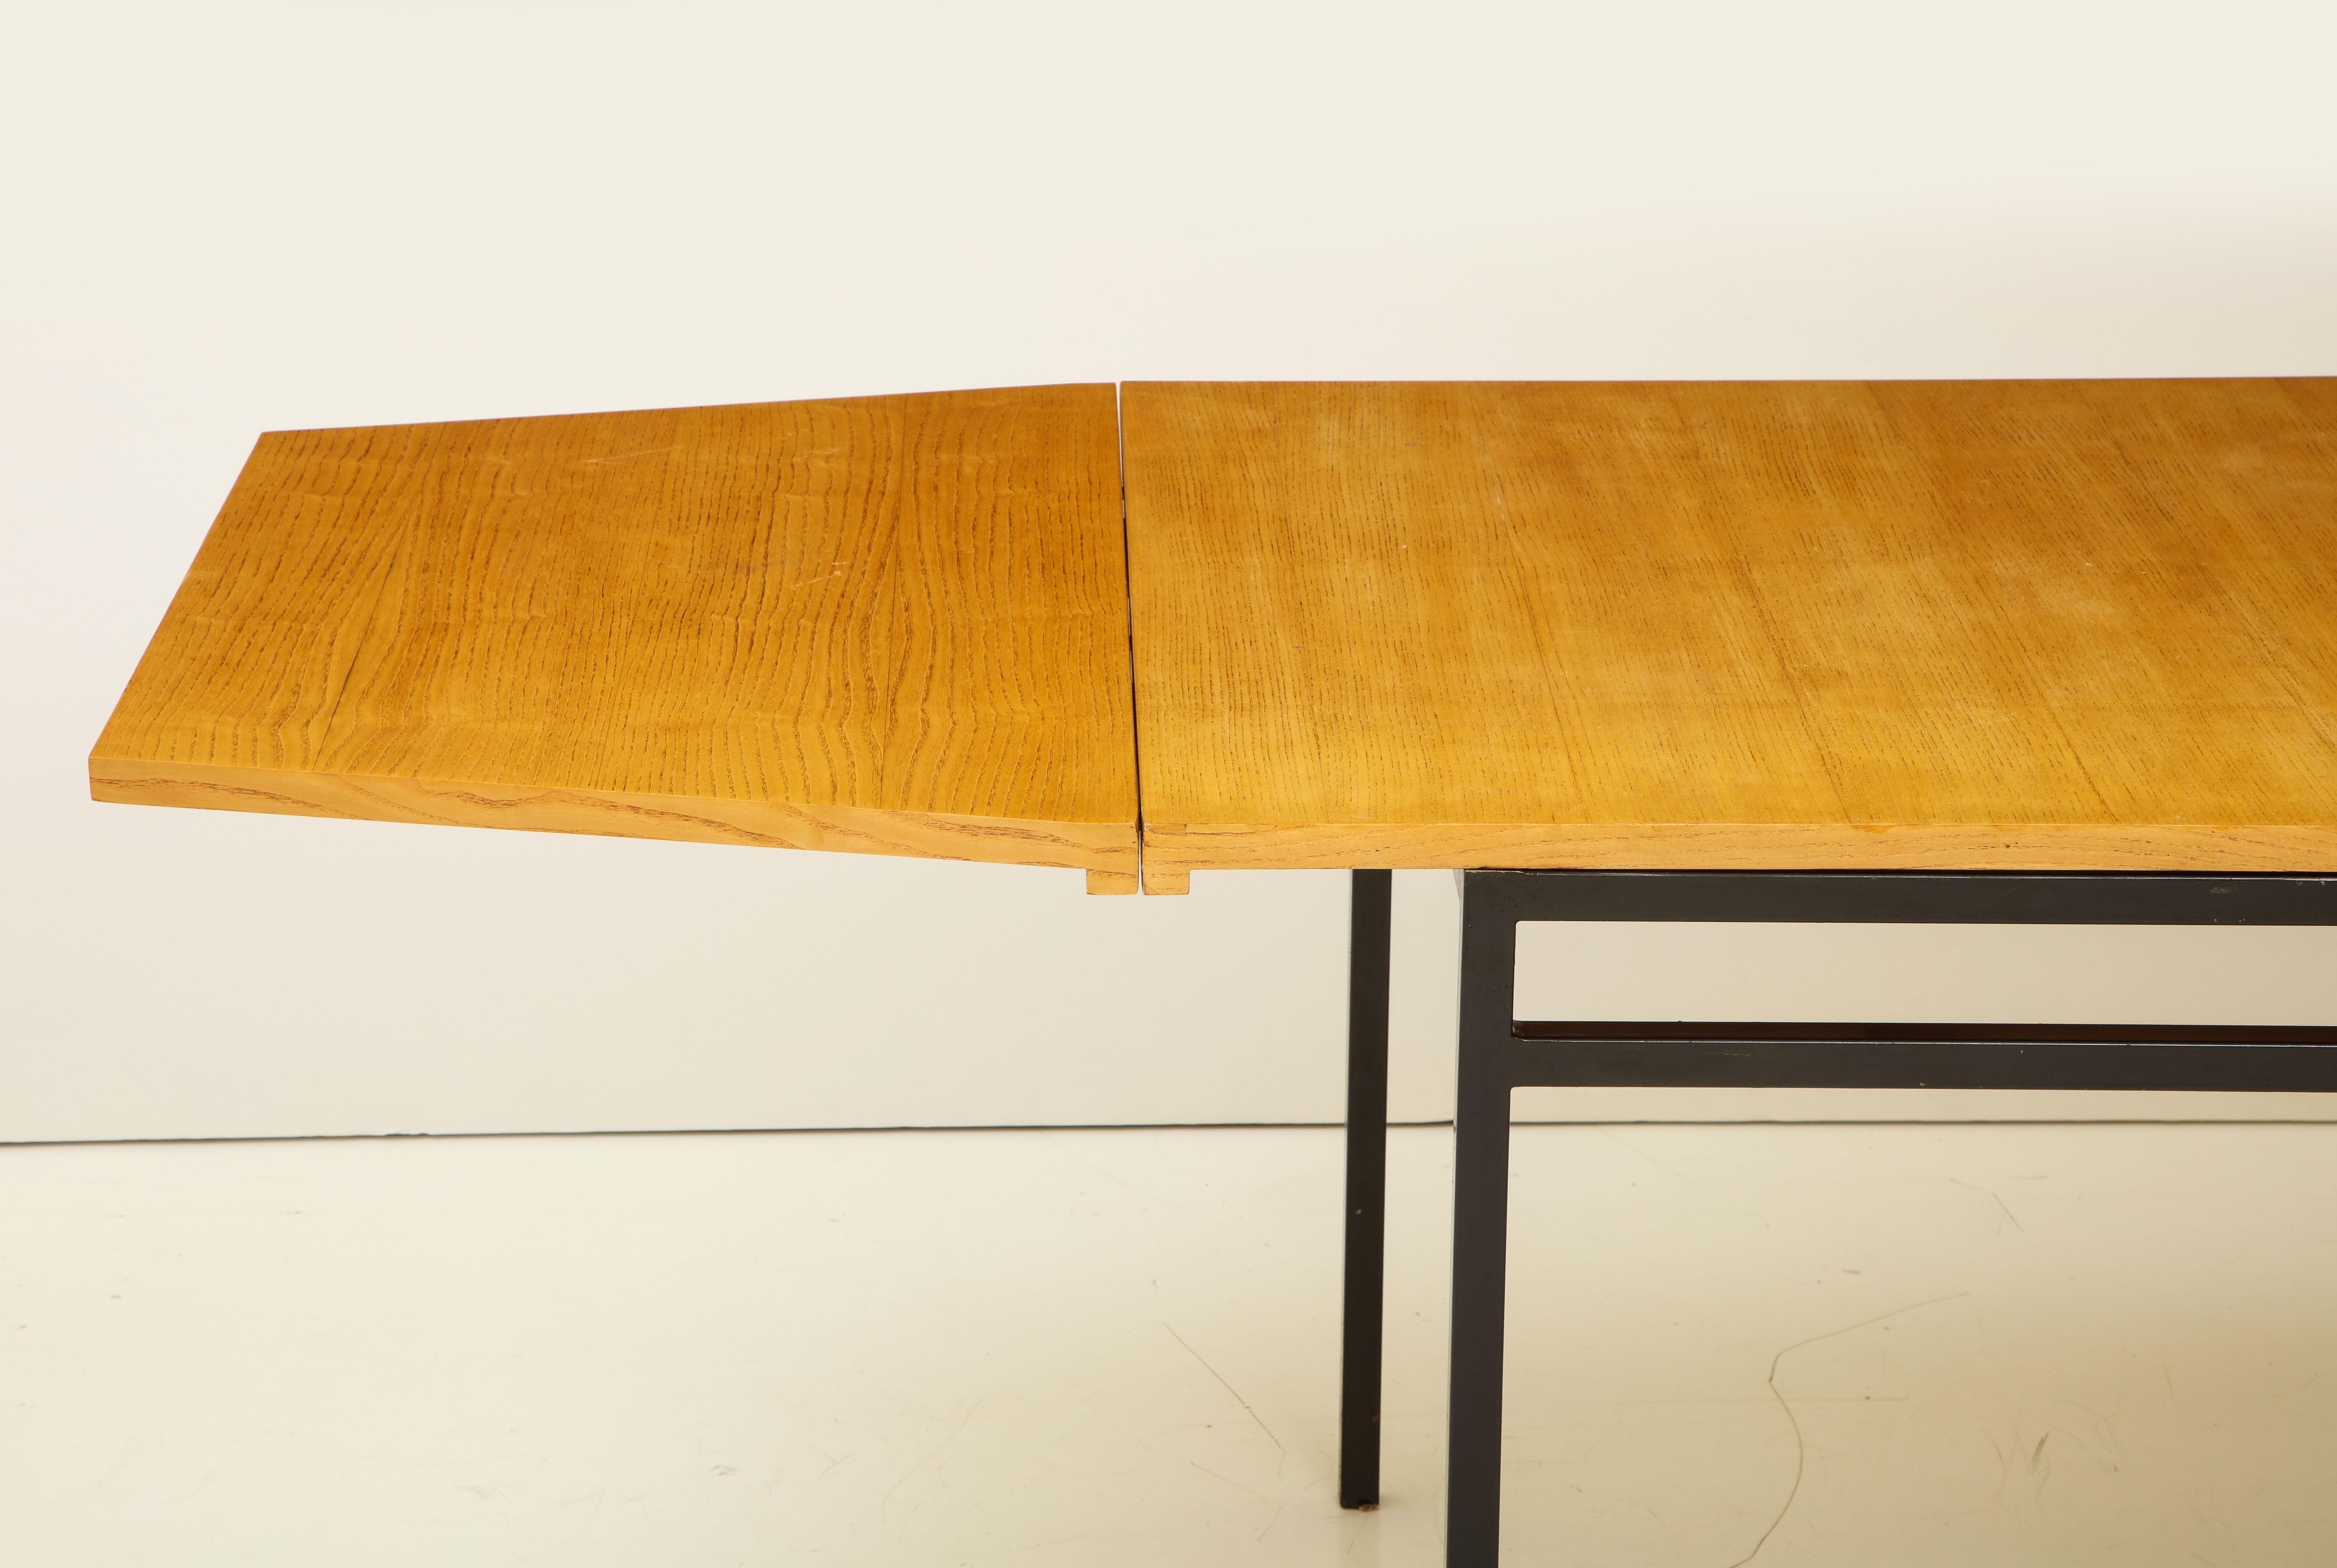 Steel Rare Expandable Dining Room Table by Pierre Guariche and Arp, France, 1960s For Sale